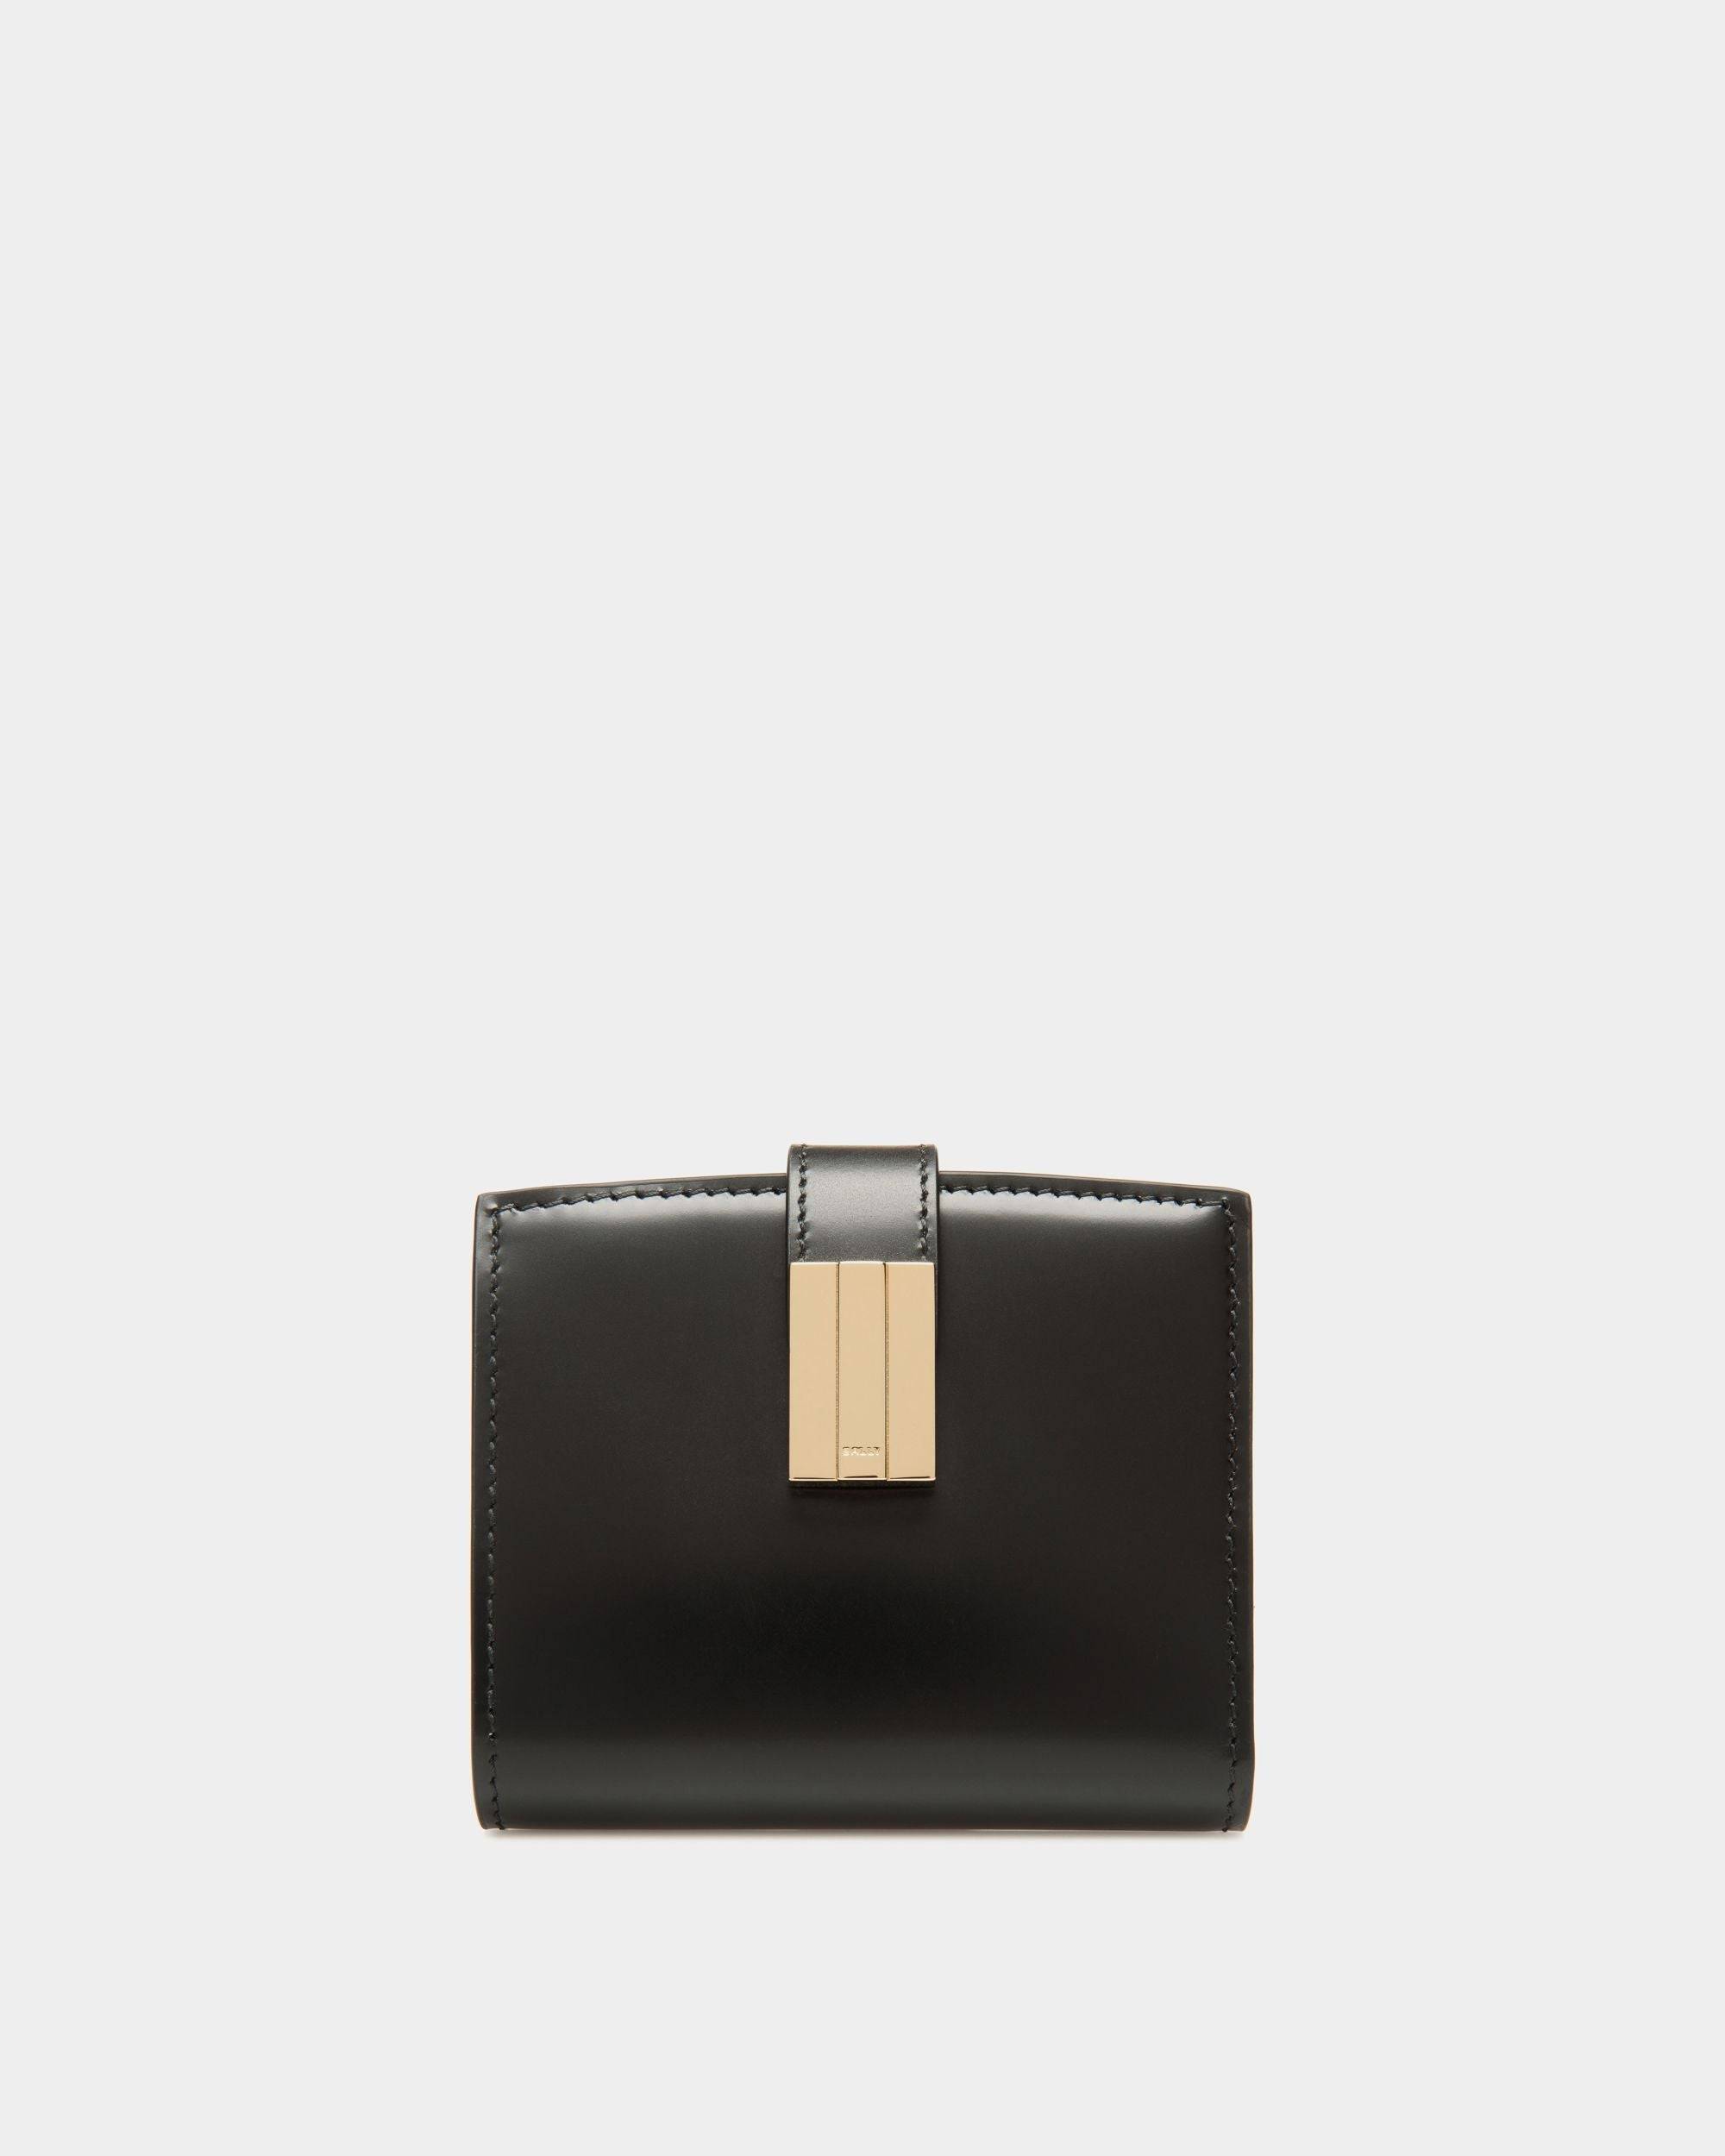 Ollam Wallet in Black Brushed Leather - Women's - Bally - 01